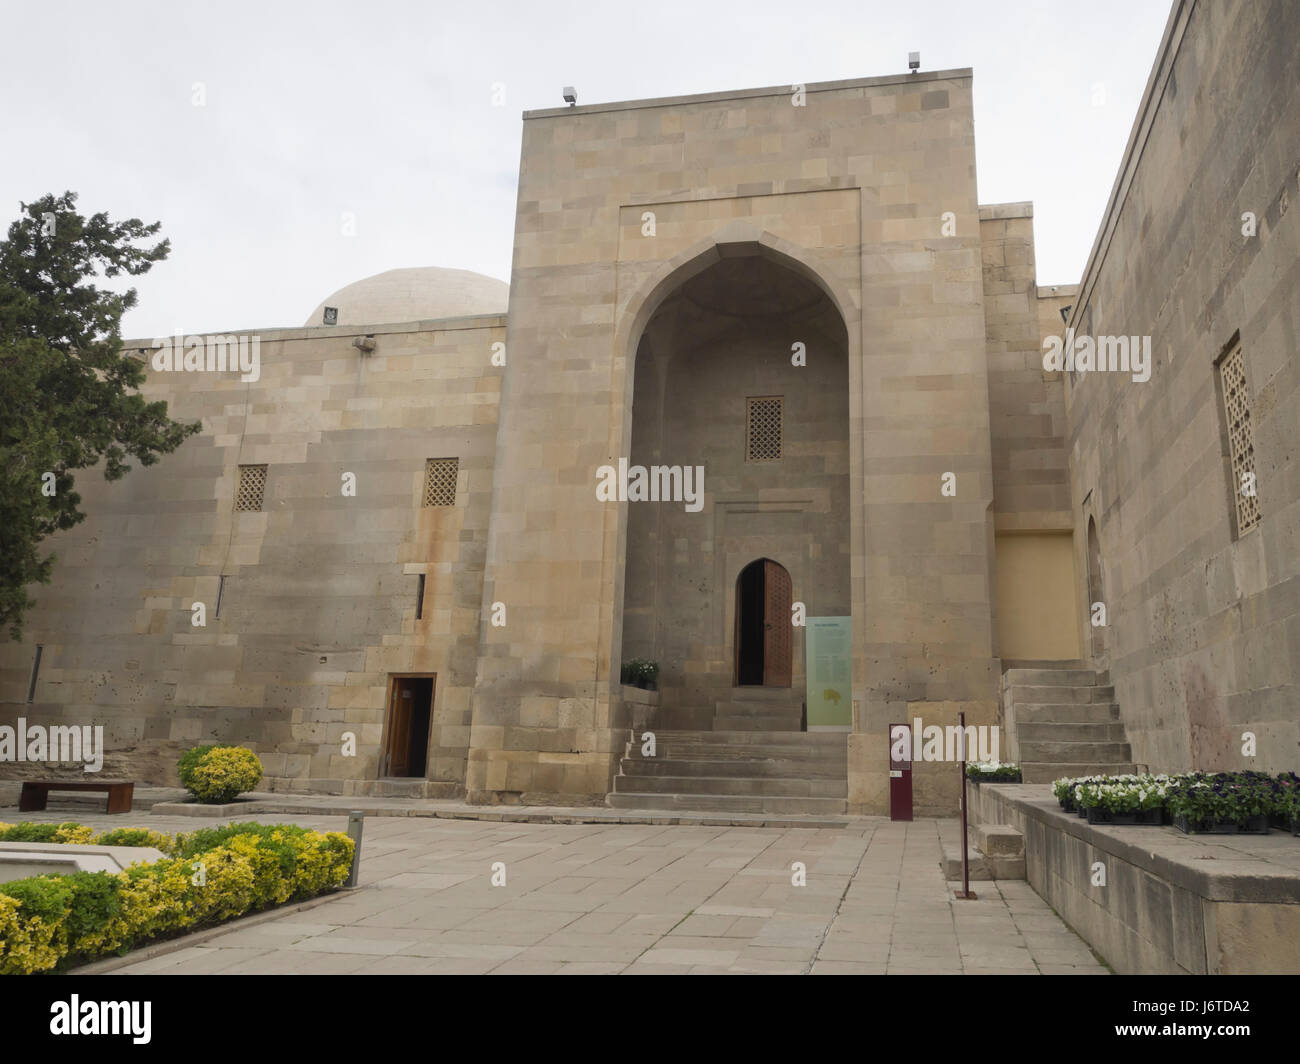 Palace of the Shirvanshahs, a Unesco world heritage site in the old walled city in Baku Azerbaijan, courtyard and main building Stock Photo